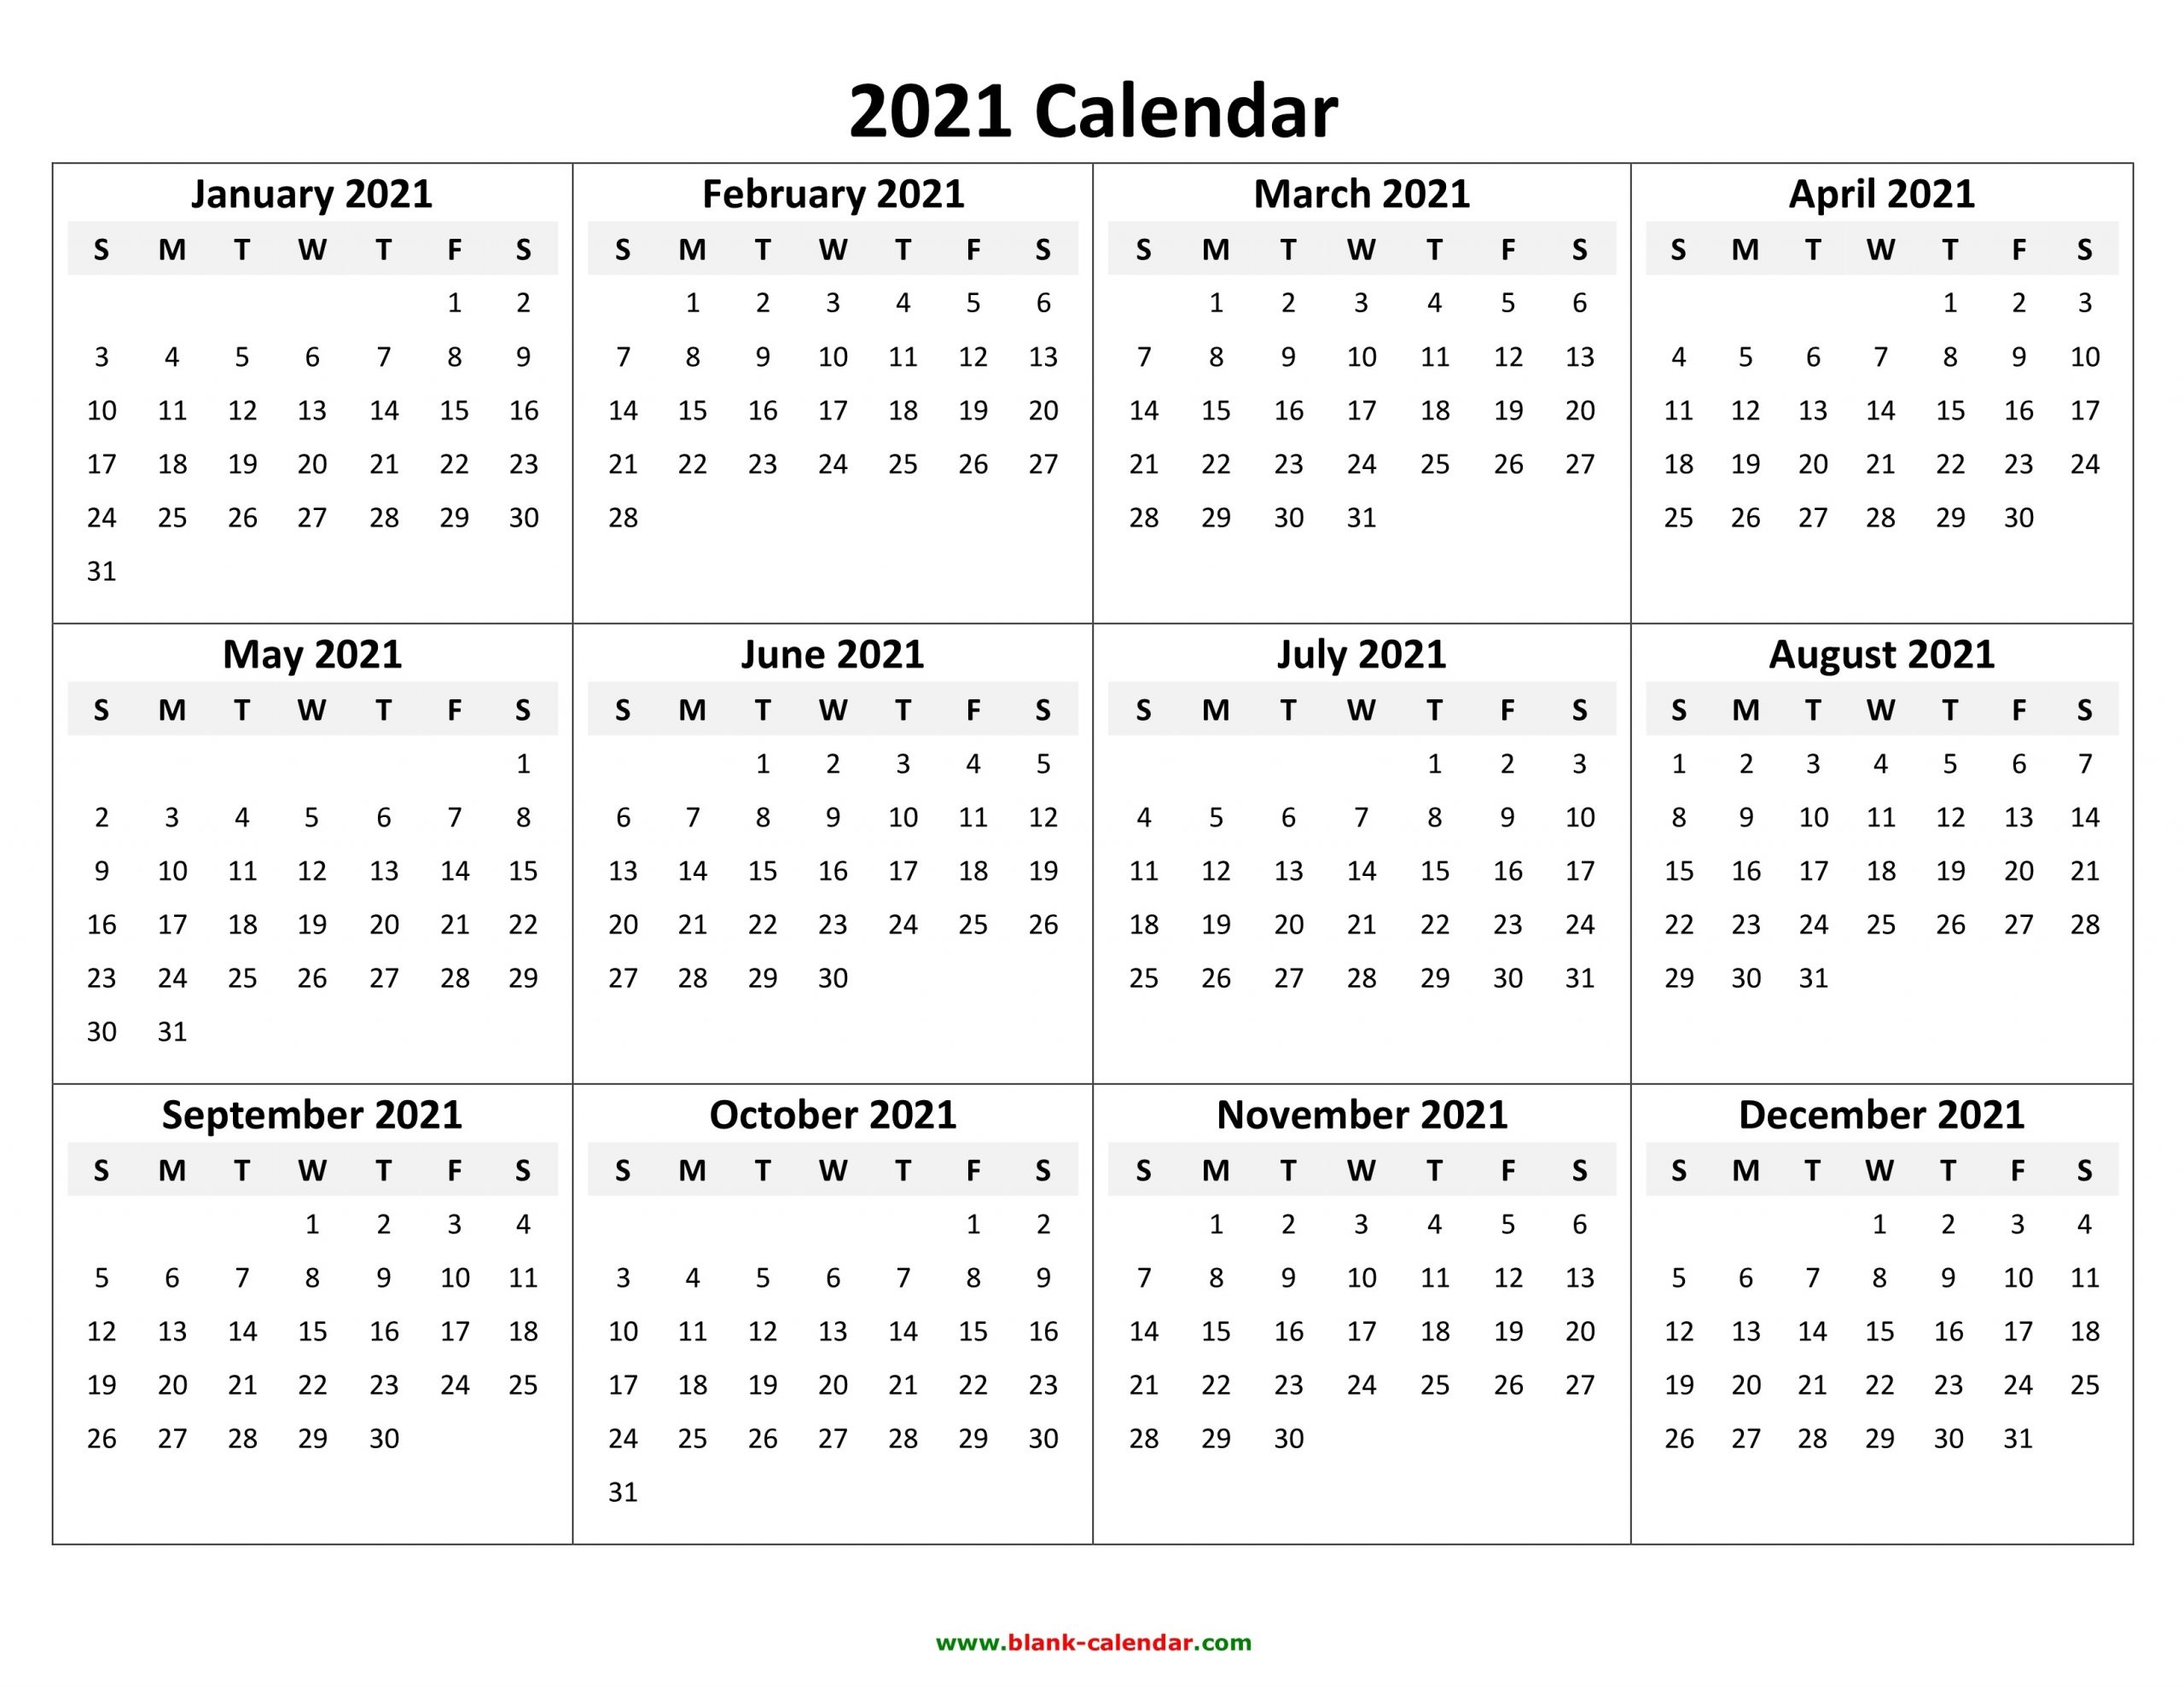 Yearly Calendar 2021 | Free Download And Print-Blank Yearly Calendar 2021